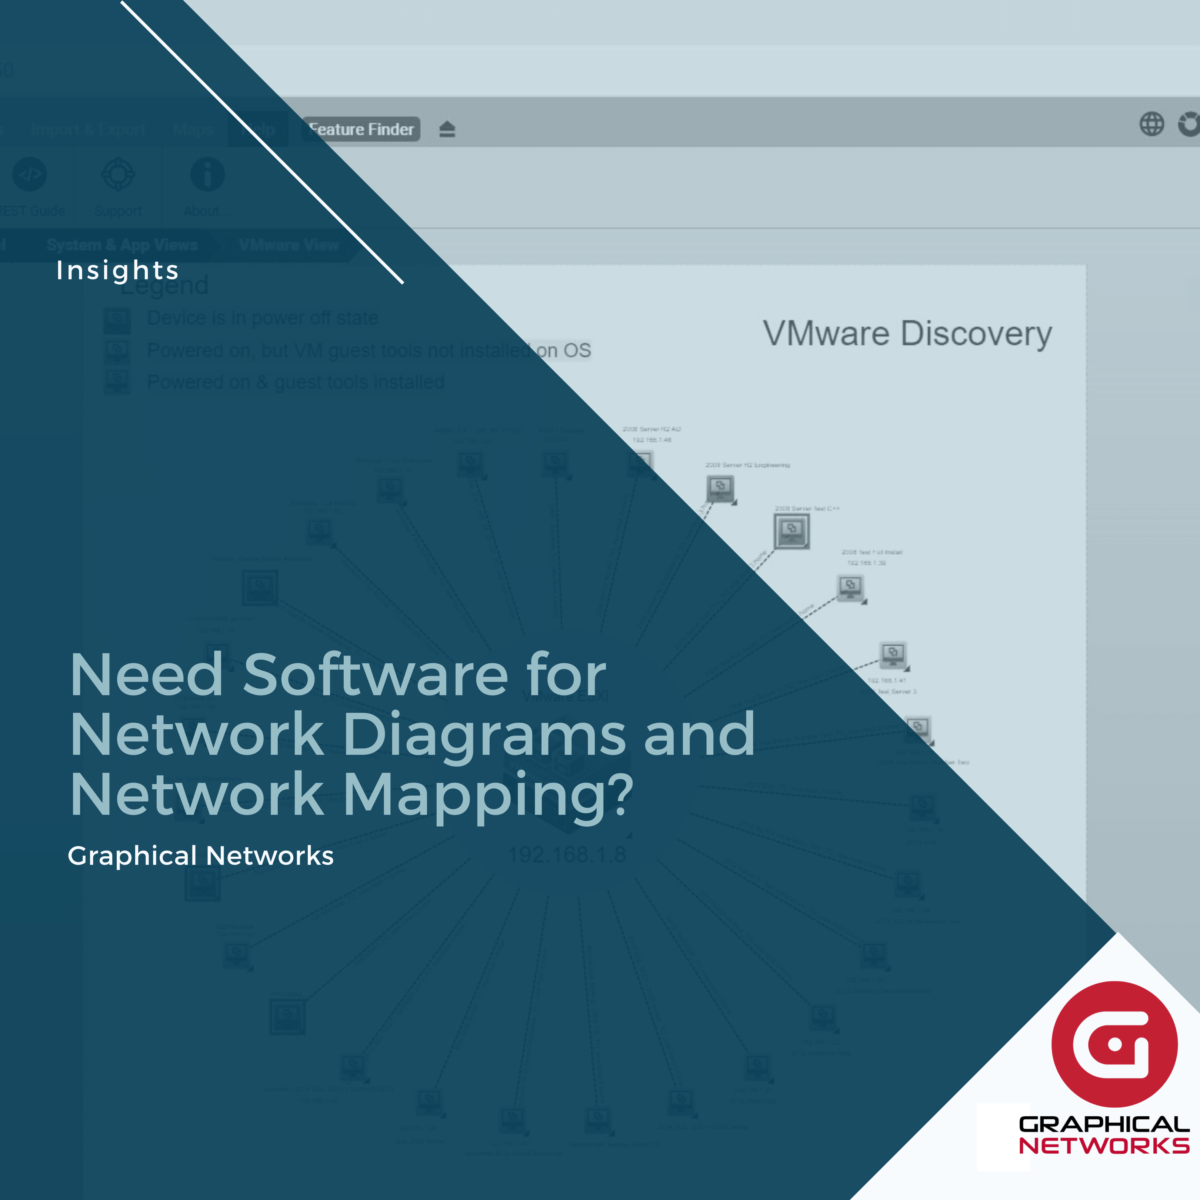 Need Software for Network Diagrams and Network Mapping?